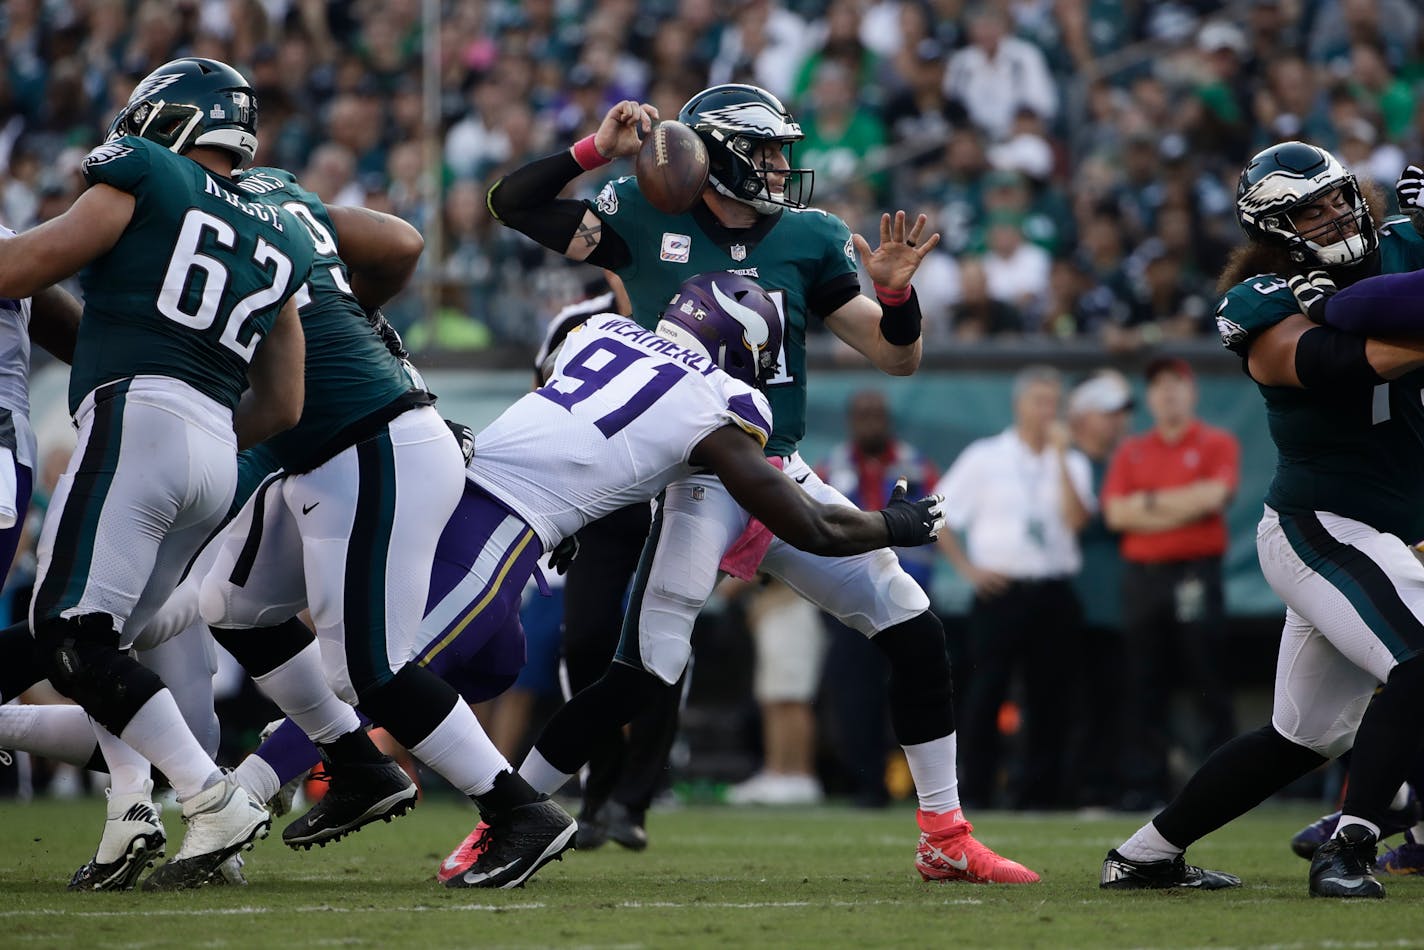 Vikings defensive end Stephen Weatherly (91), inheriting a starting role while Everson Griffen addresses some mental health issues, forced the fumble by Eagles quarterback Carson Wentz that led to a Linval Joseph TD.